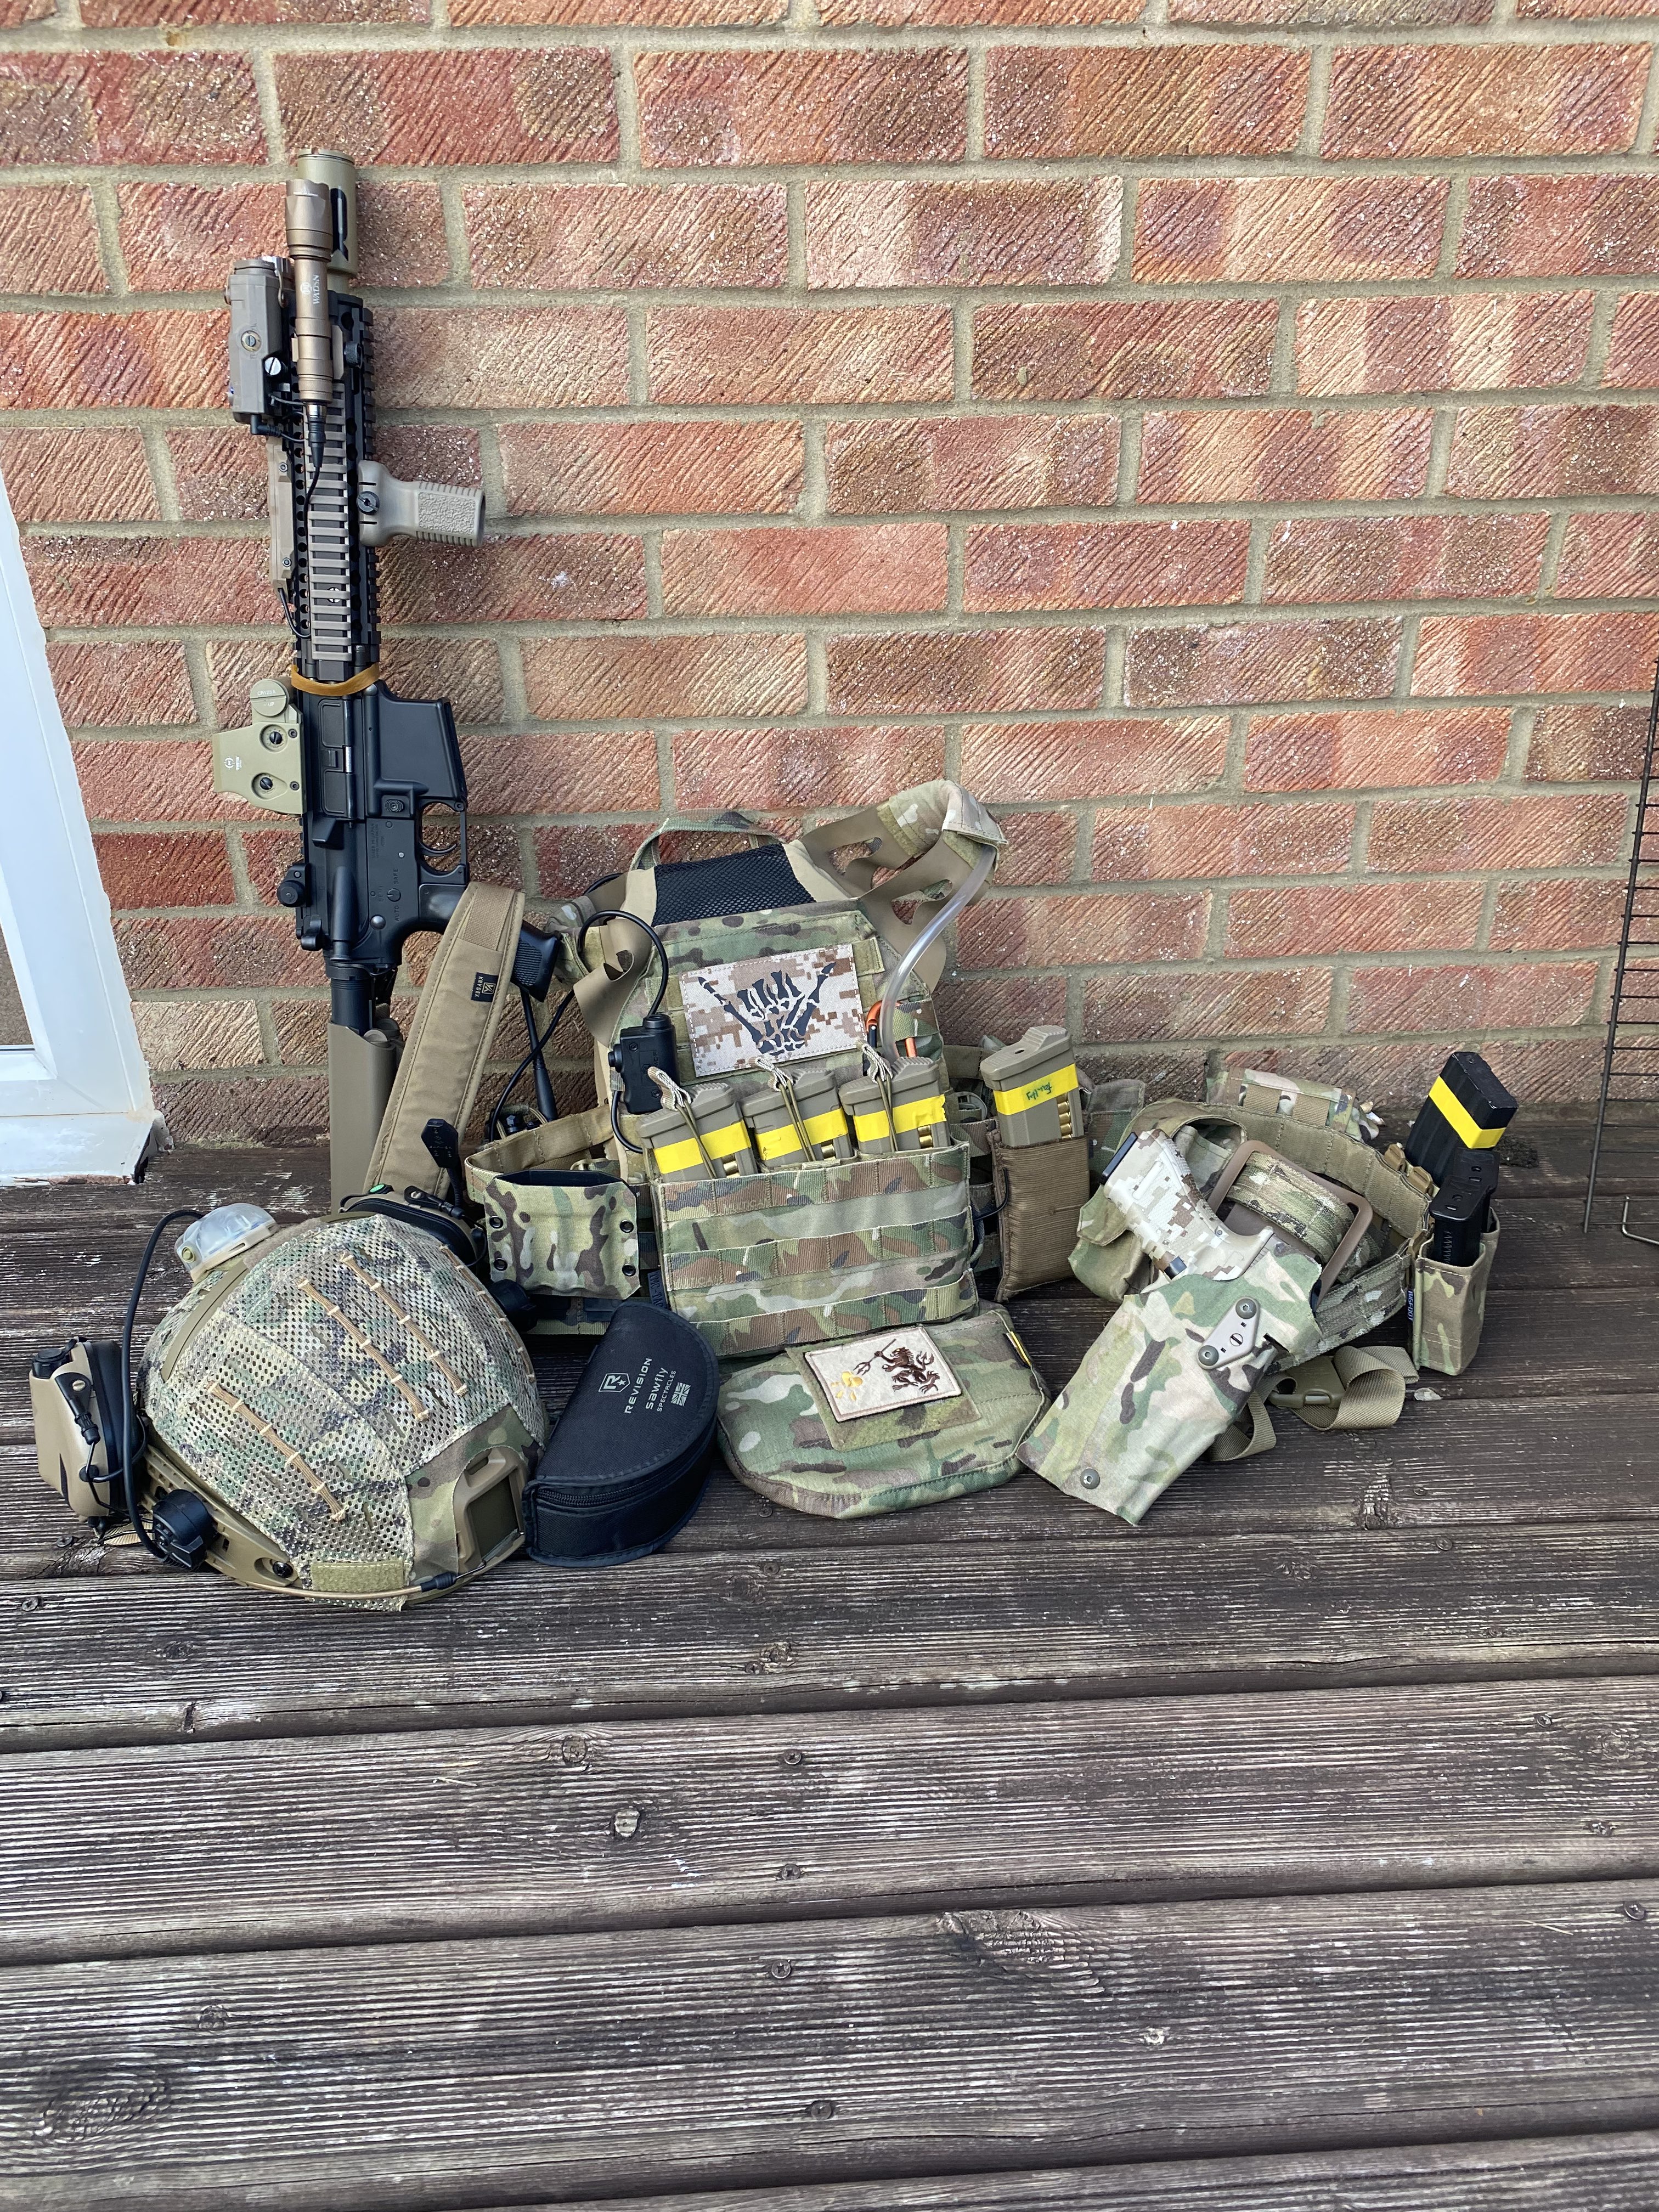 New to airsoft and looking for inspiration on what to put on our